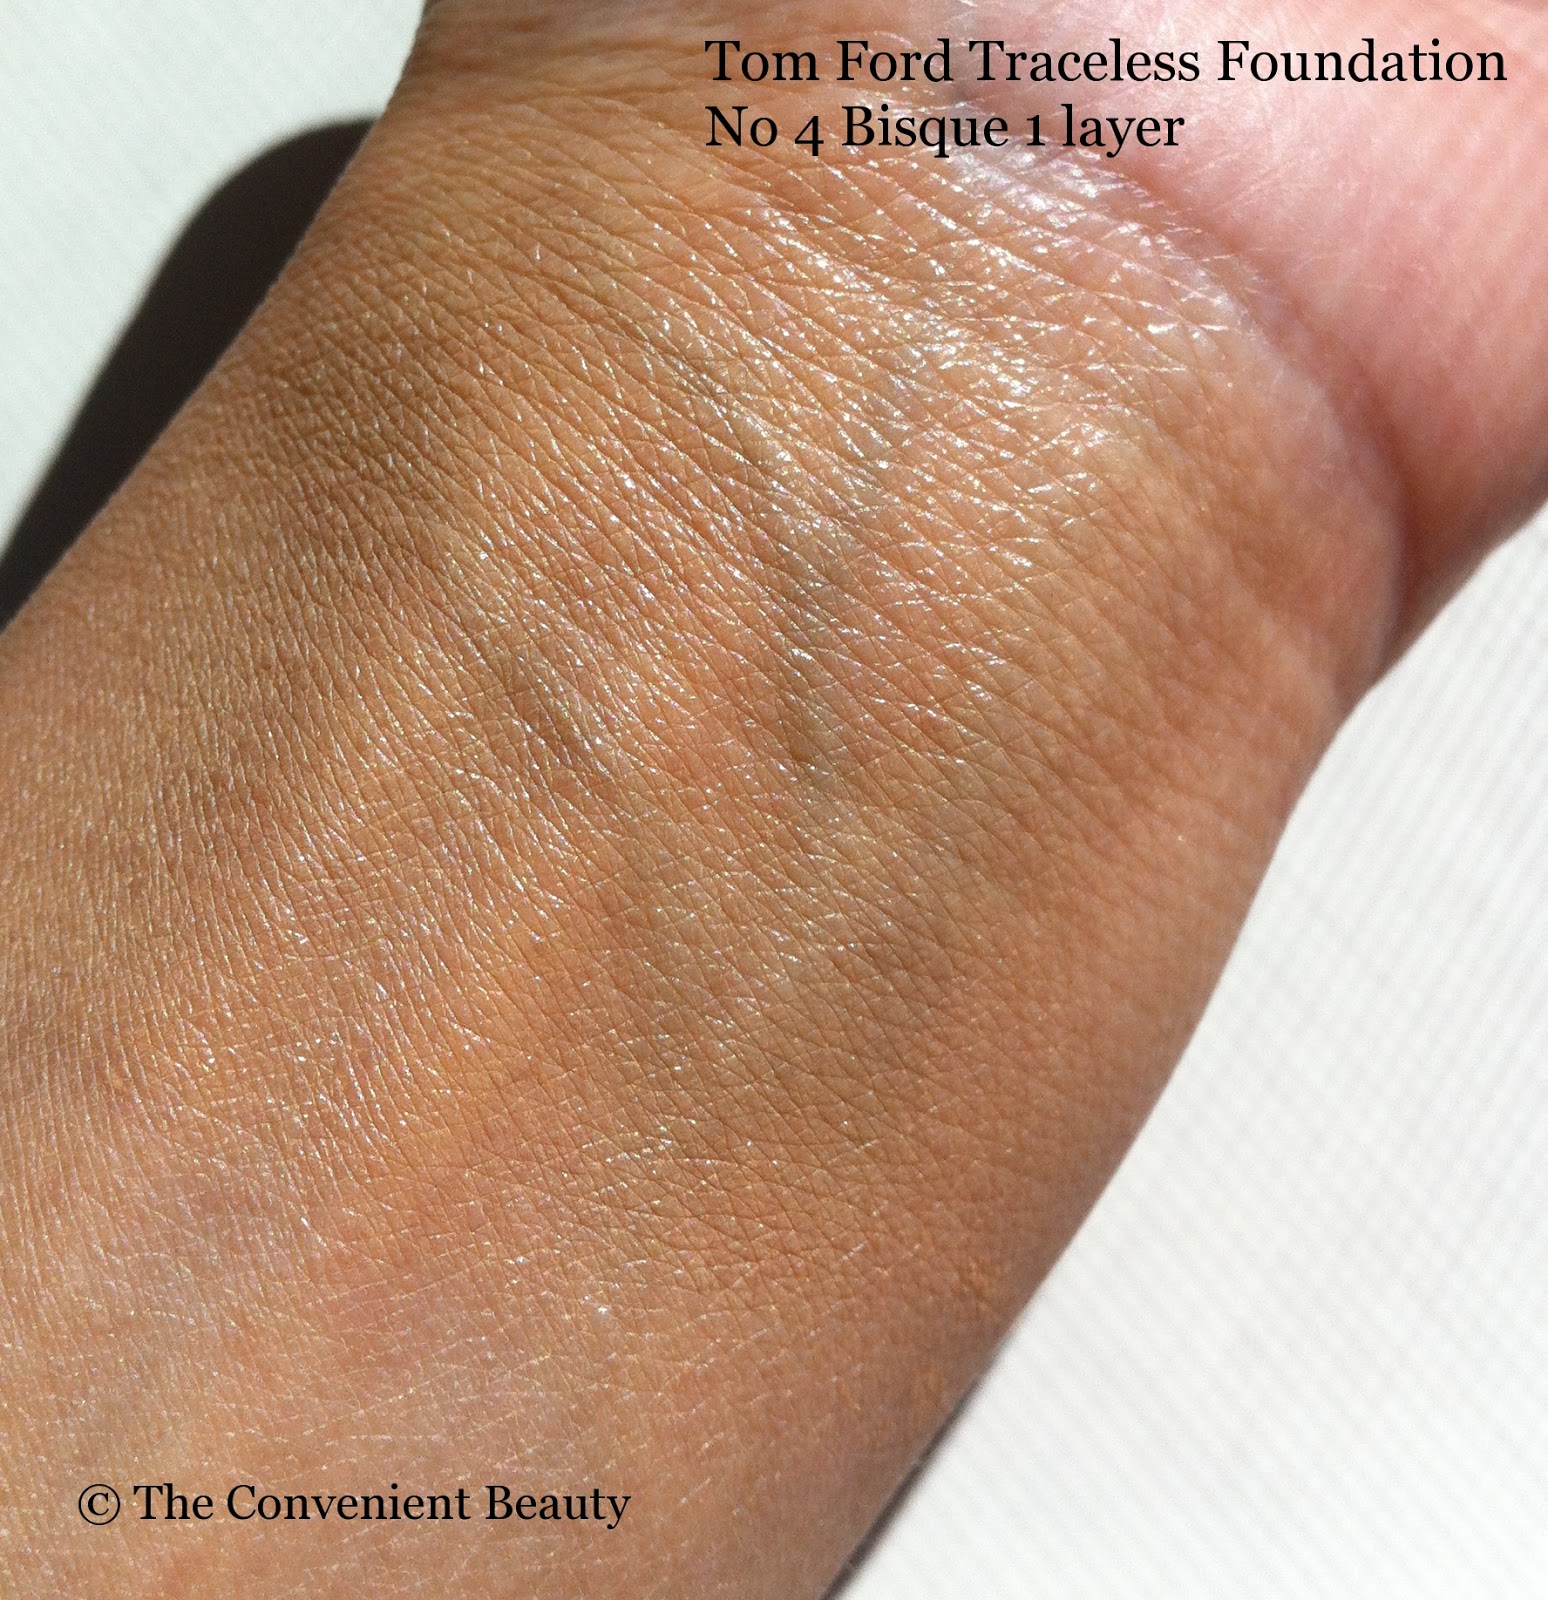 The Convenient Beauty: Review: Tom Ford Traceless Foundation Liquid SPF 15